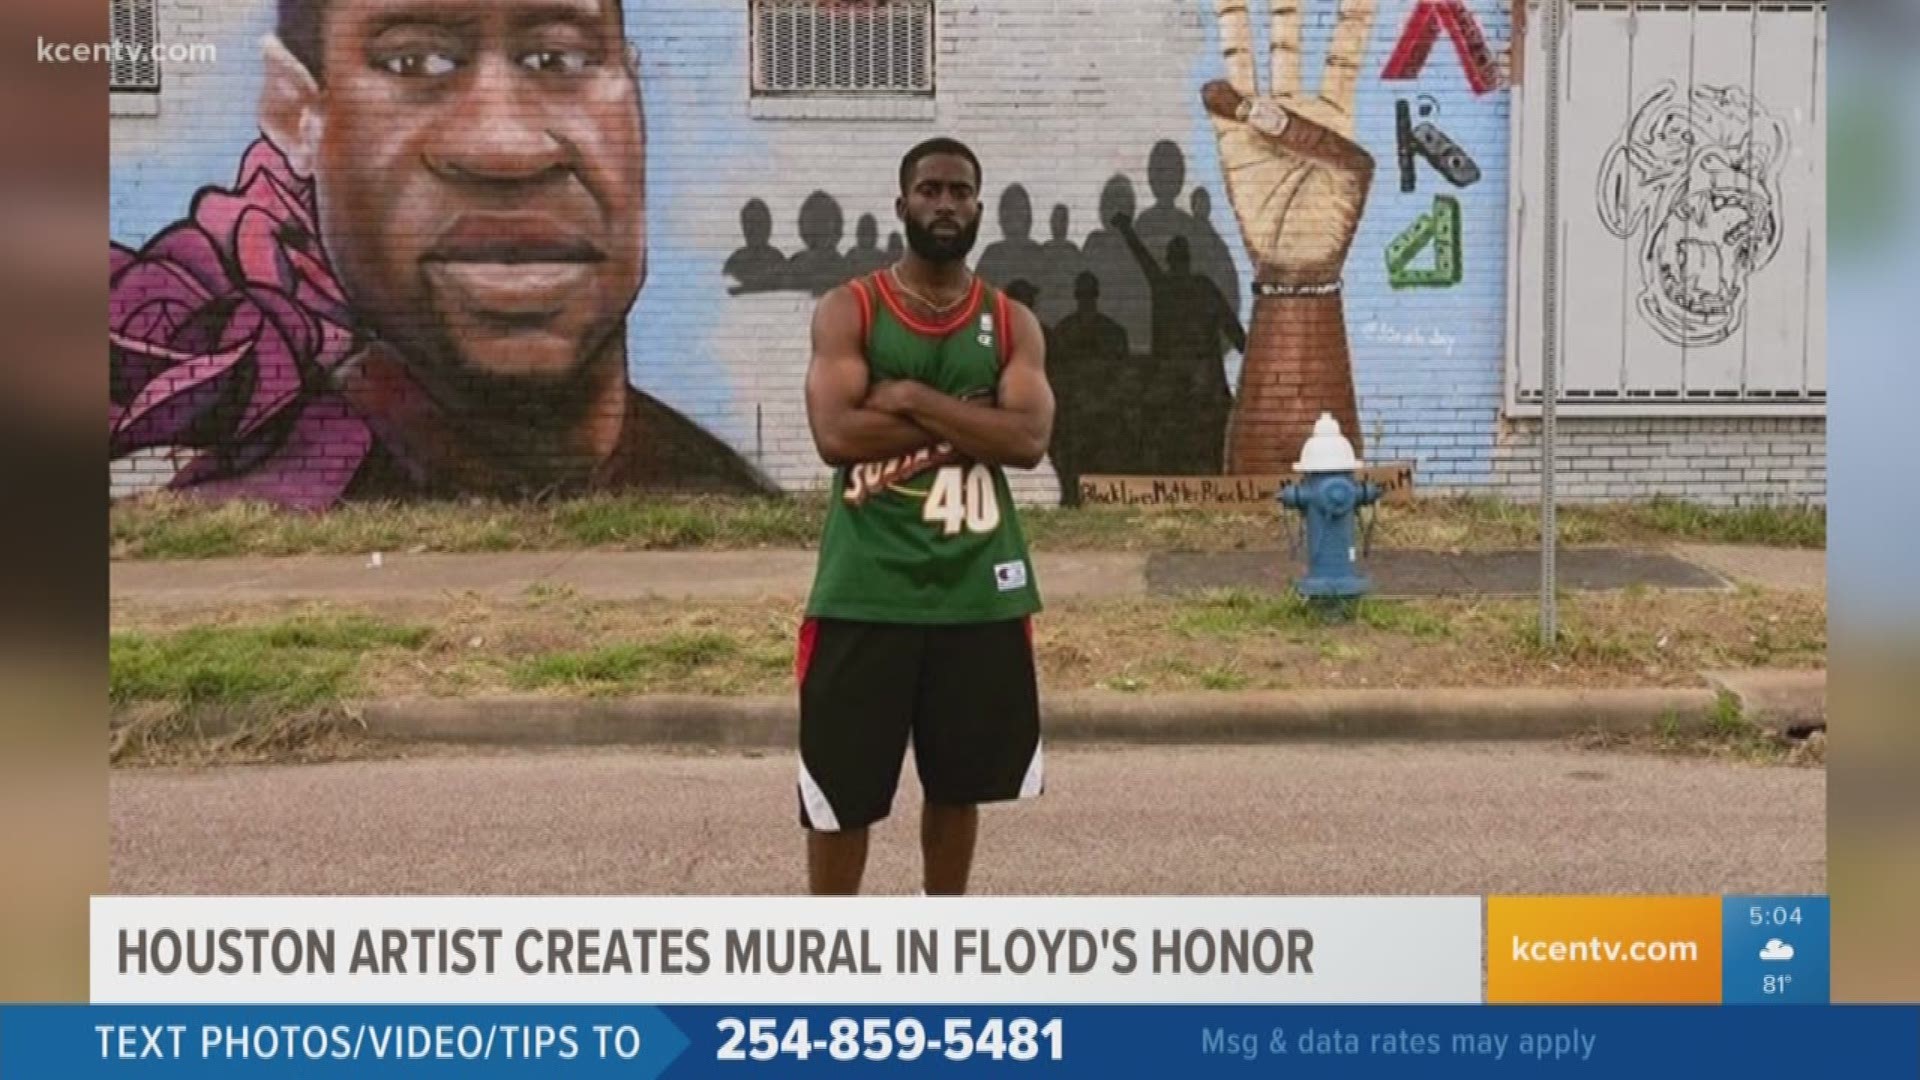 Jonah Jackson of third ward shared his talents to bring love to his community,